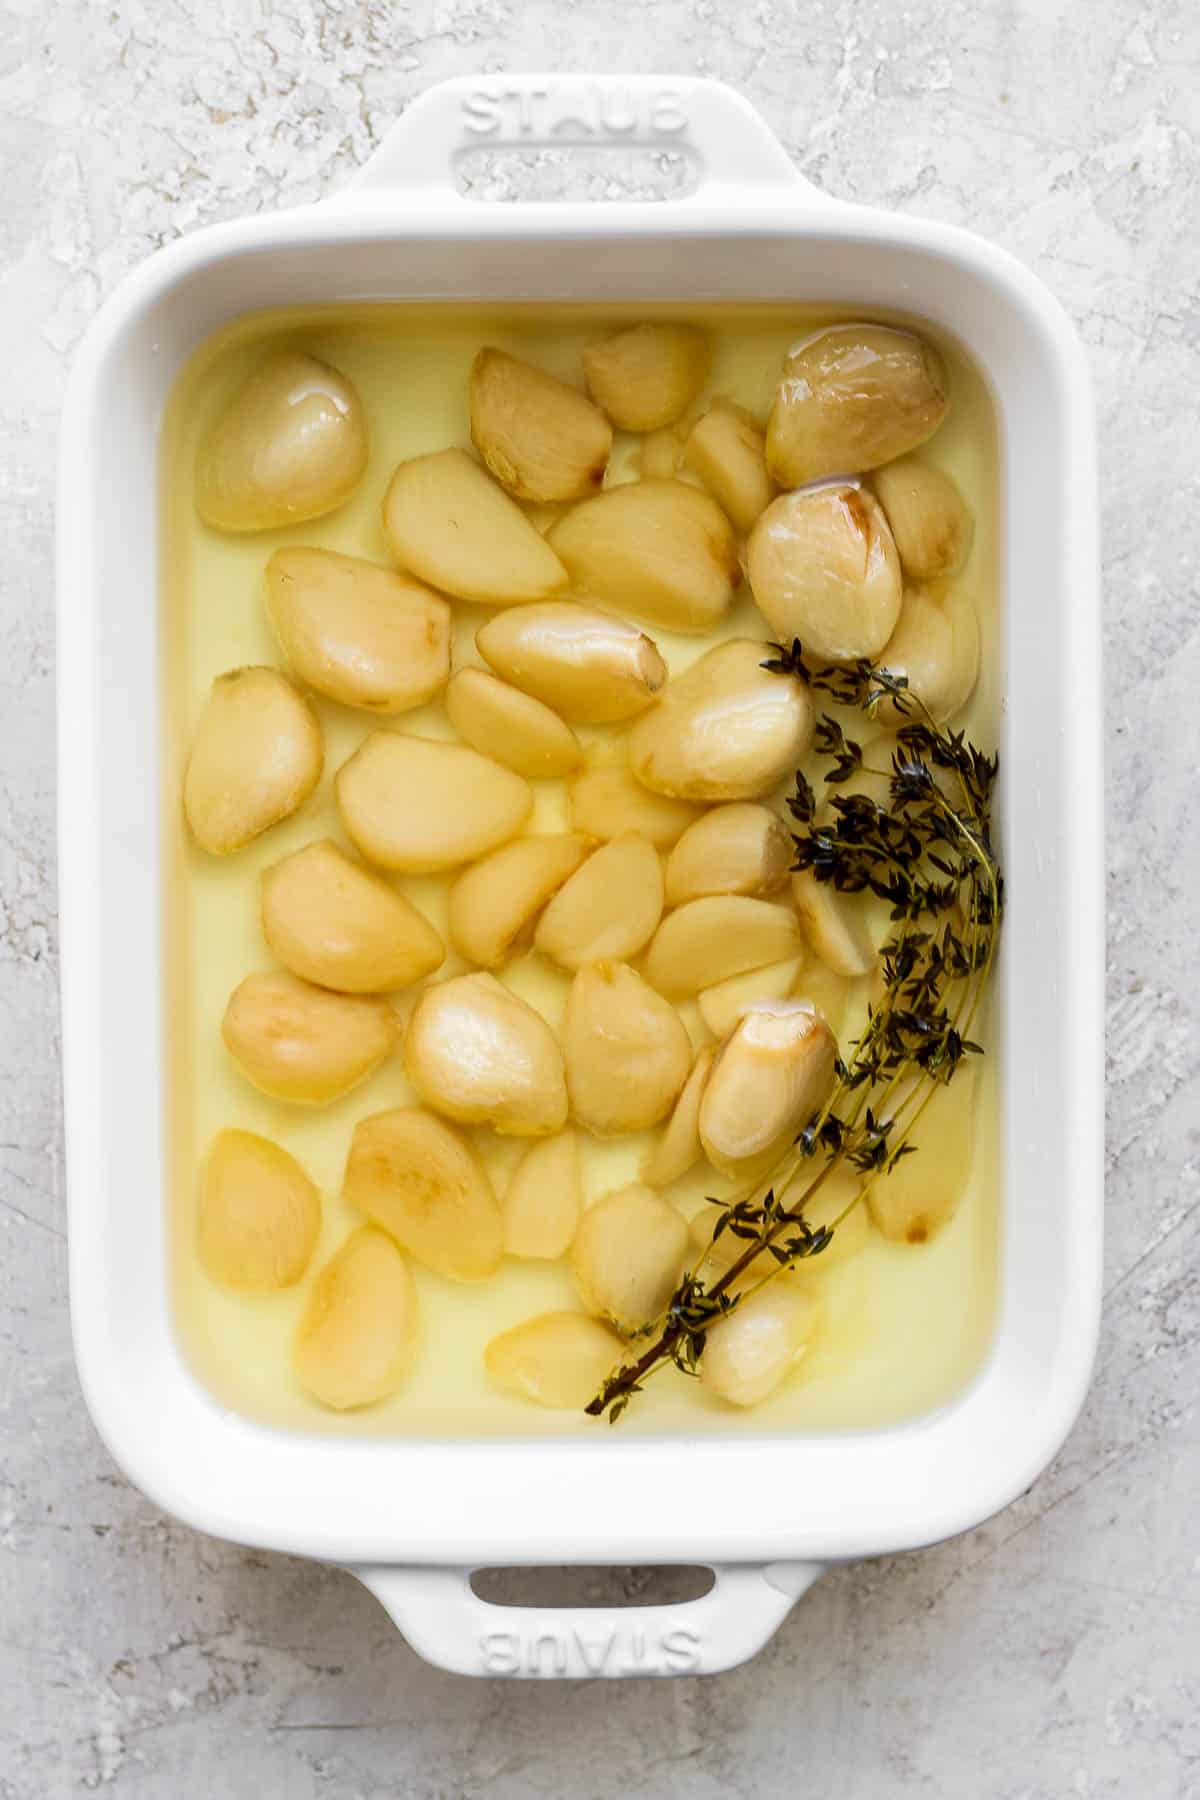 Garlic confit in a baking dish after baking in the oven.